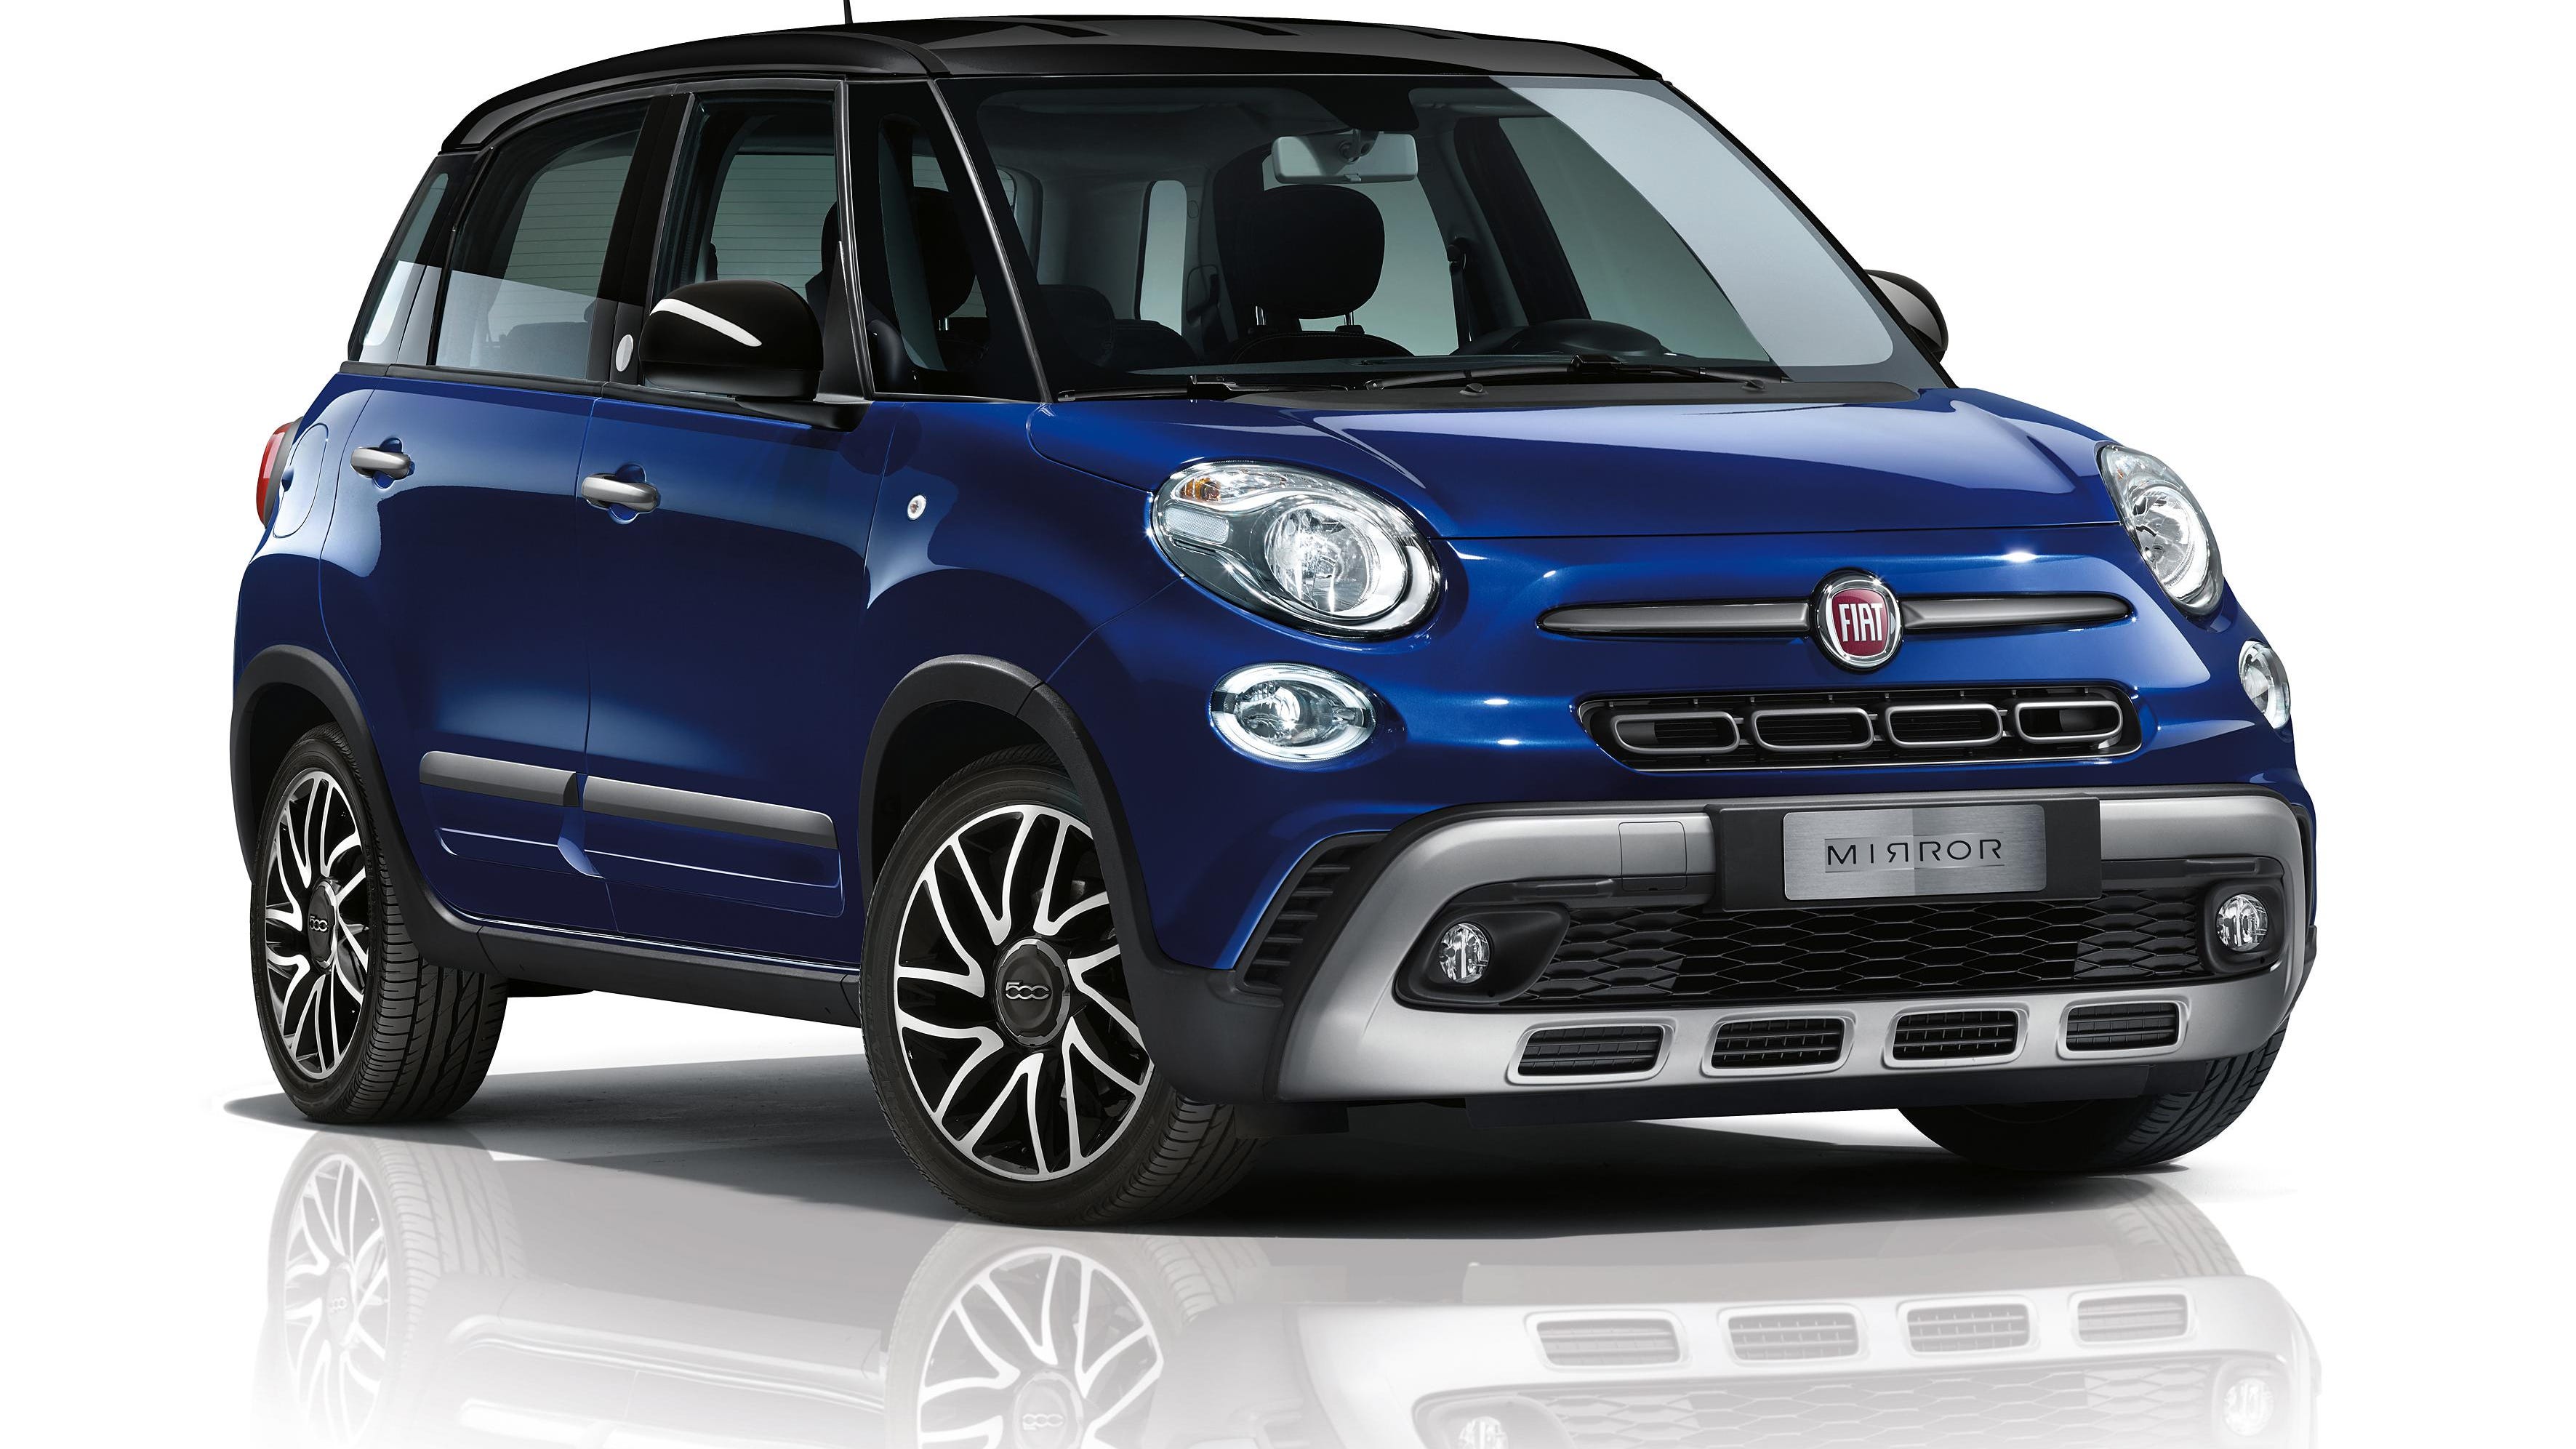 Overpriced and Underperforming: Why the 2019 Fiat 500L Comes Up Small